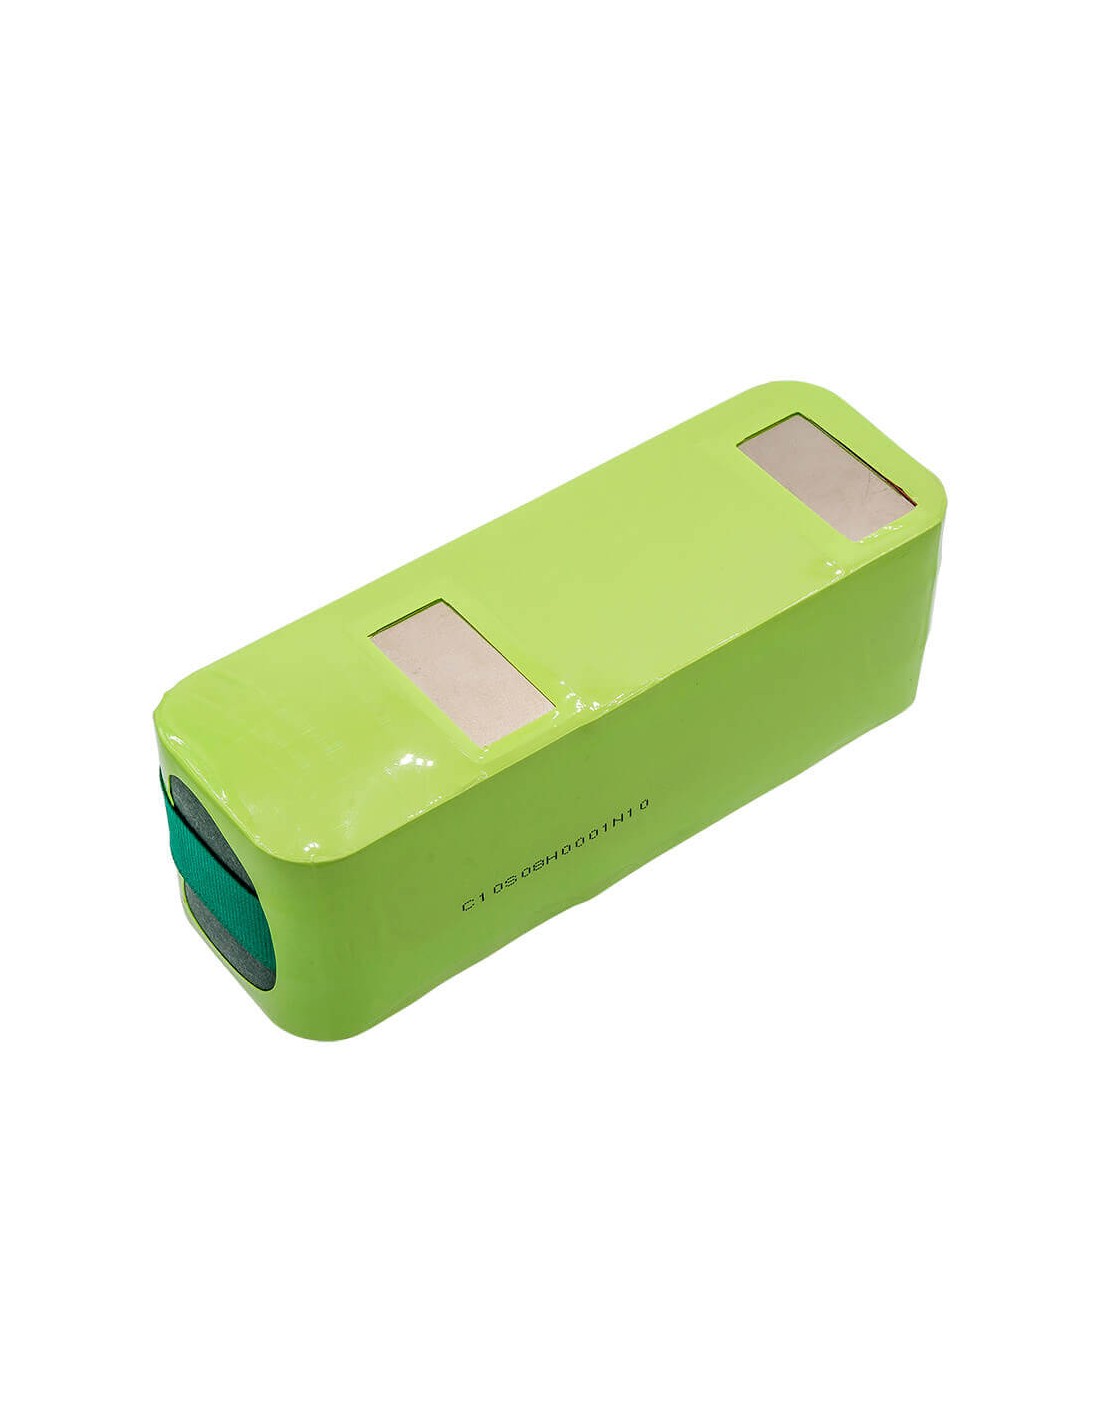 Battery for Infinuvo Cleanmate 365, Cleanmate Qq1, Cleanmate Qq2 14.4V, 2800mAh - 40.32Wh